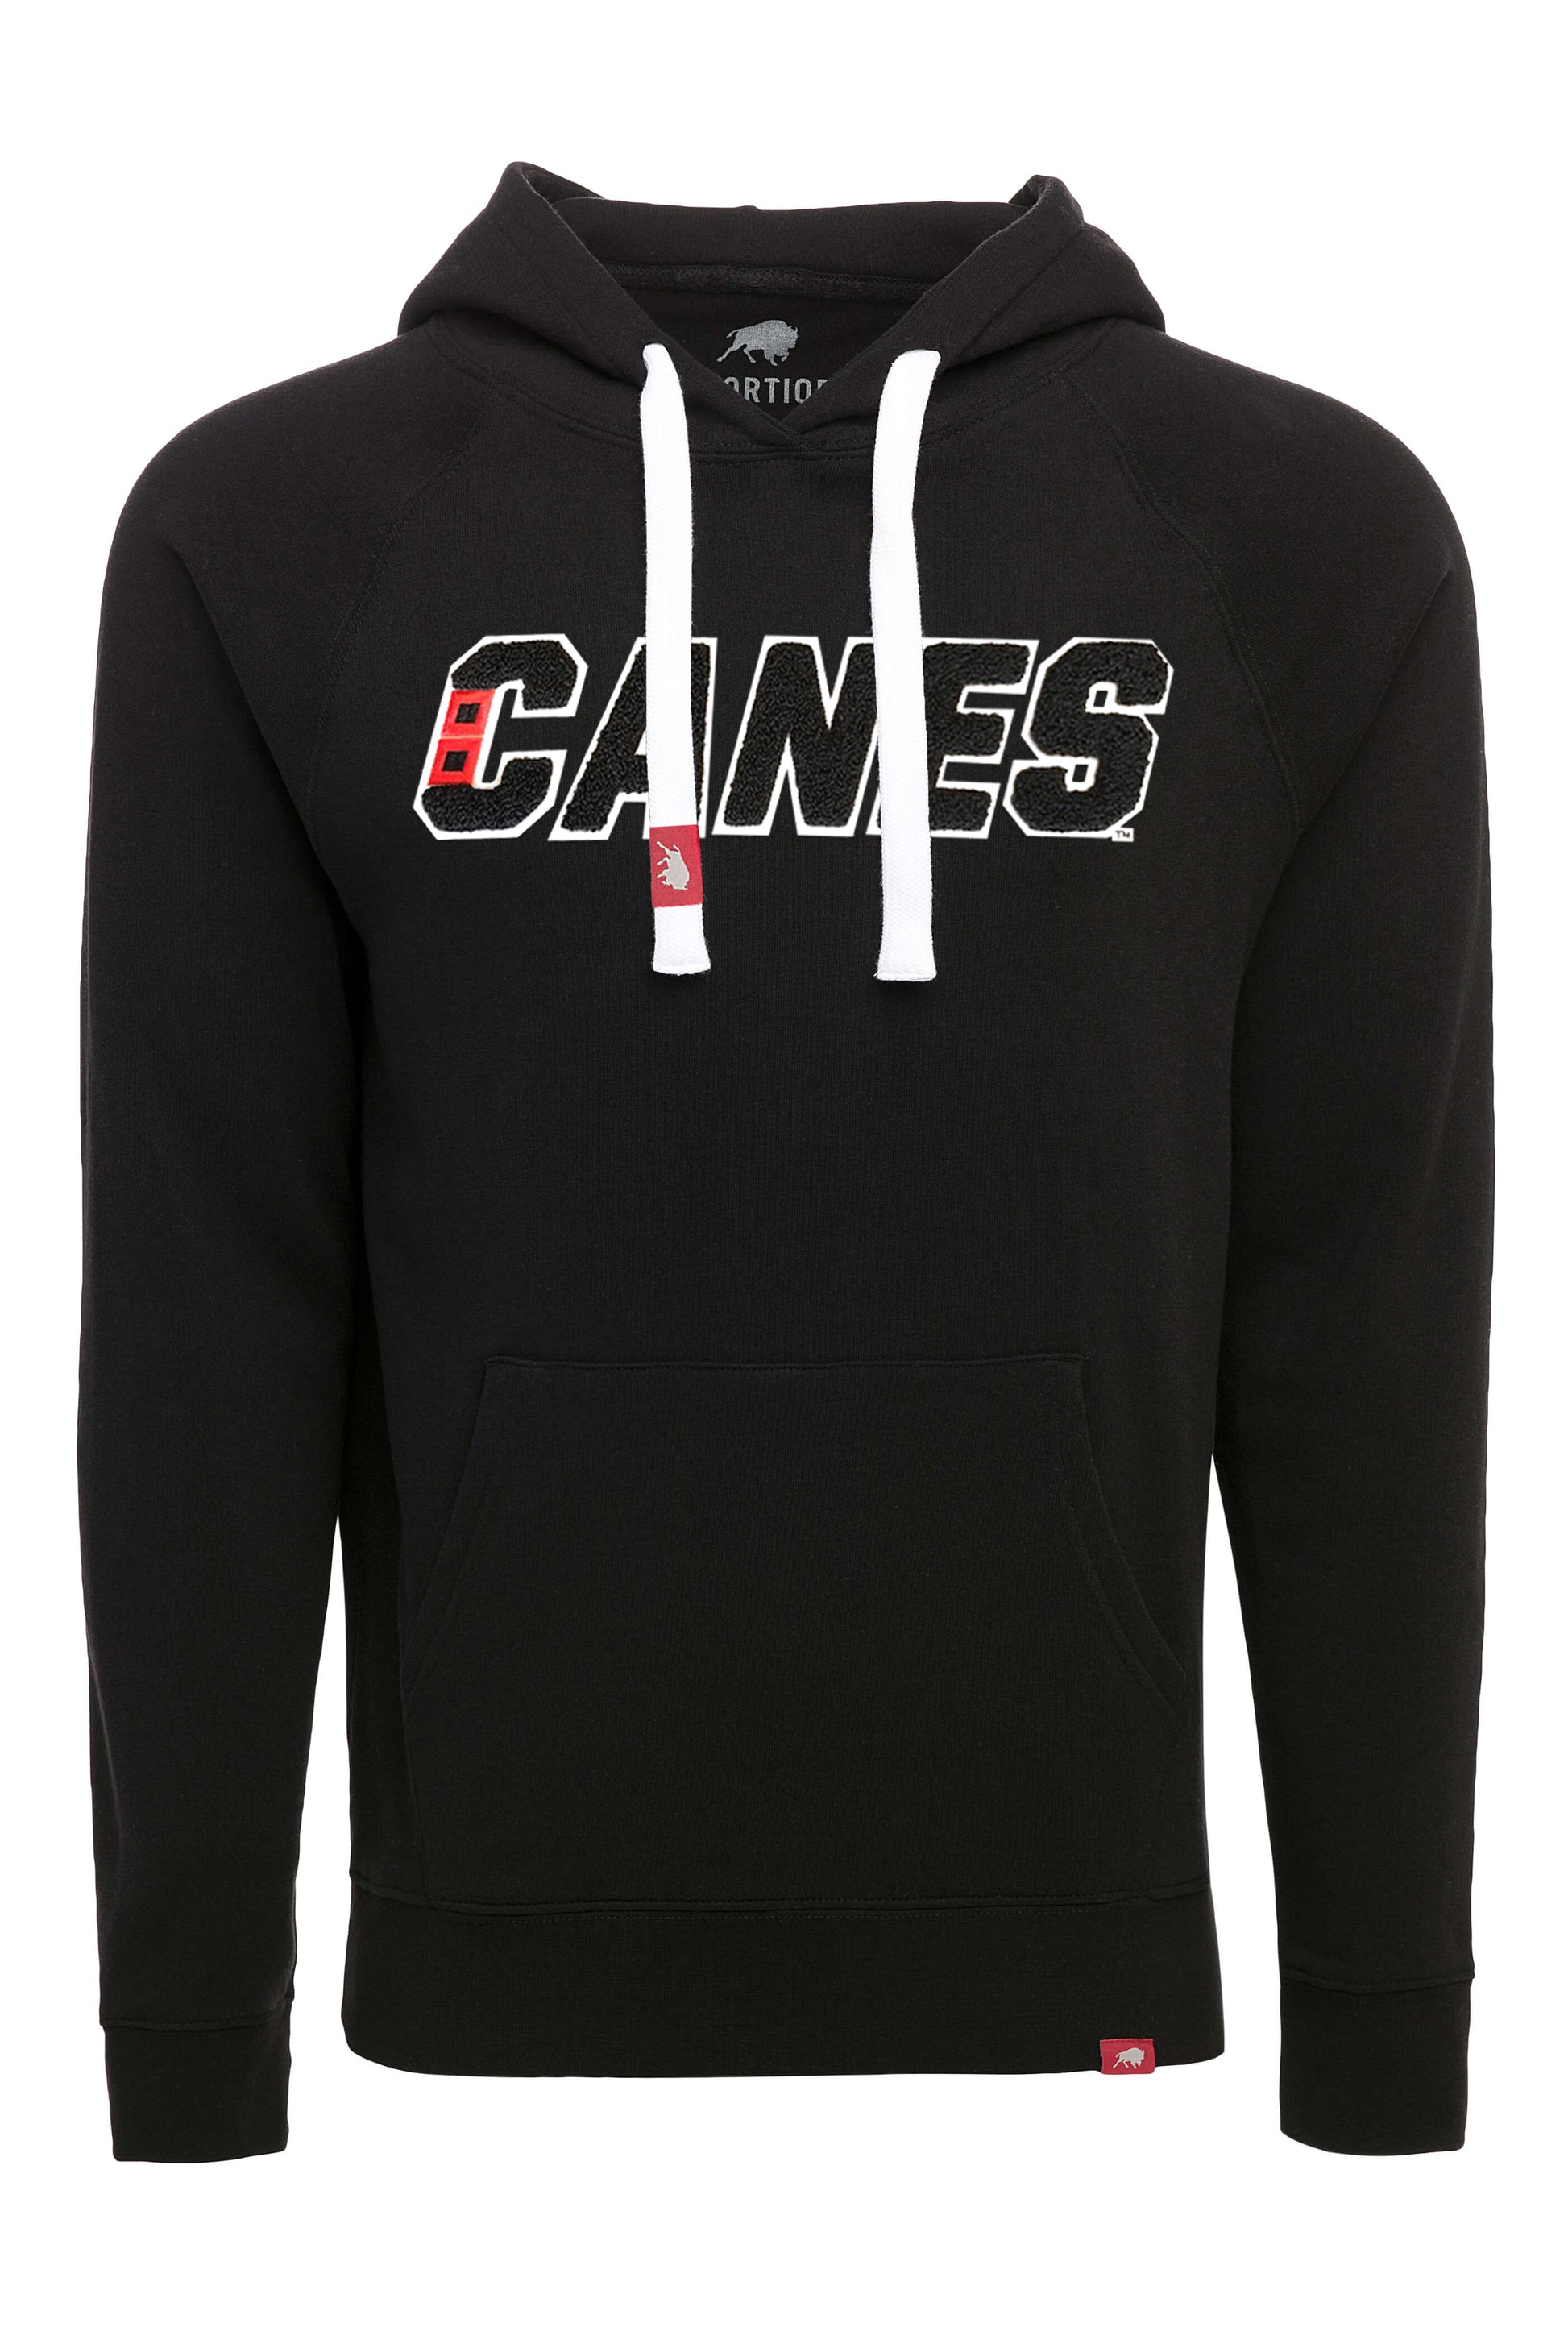 Front View: Black hoodie with CANES wordmark on front with white hood strings.